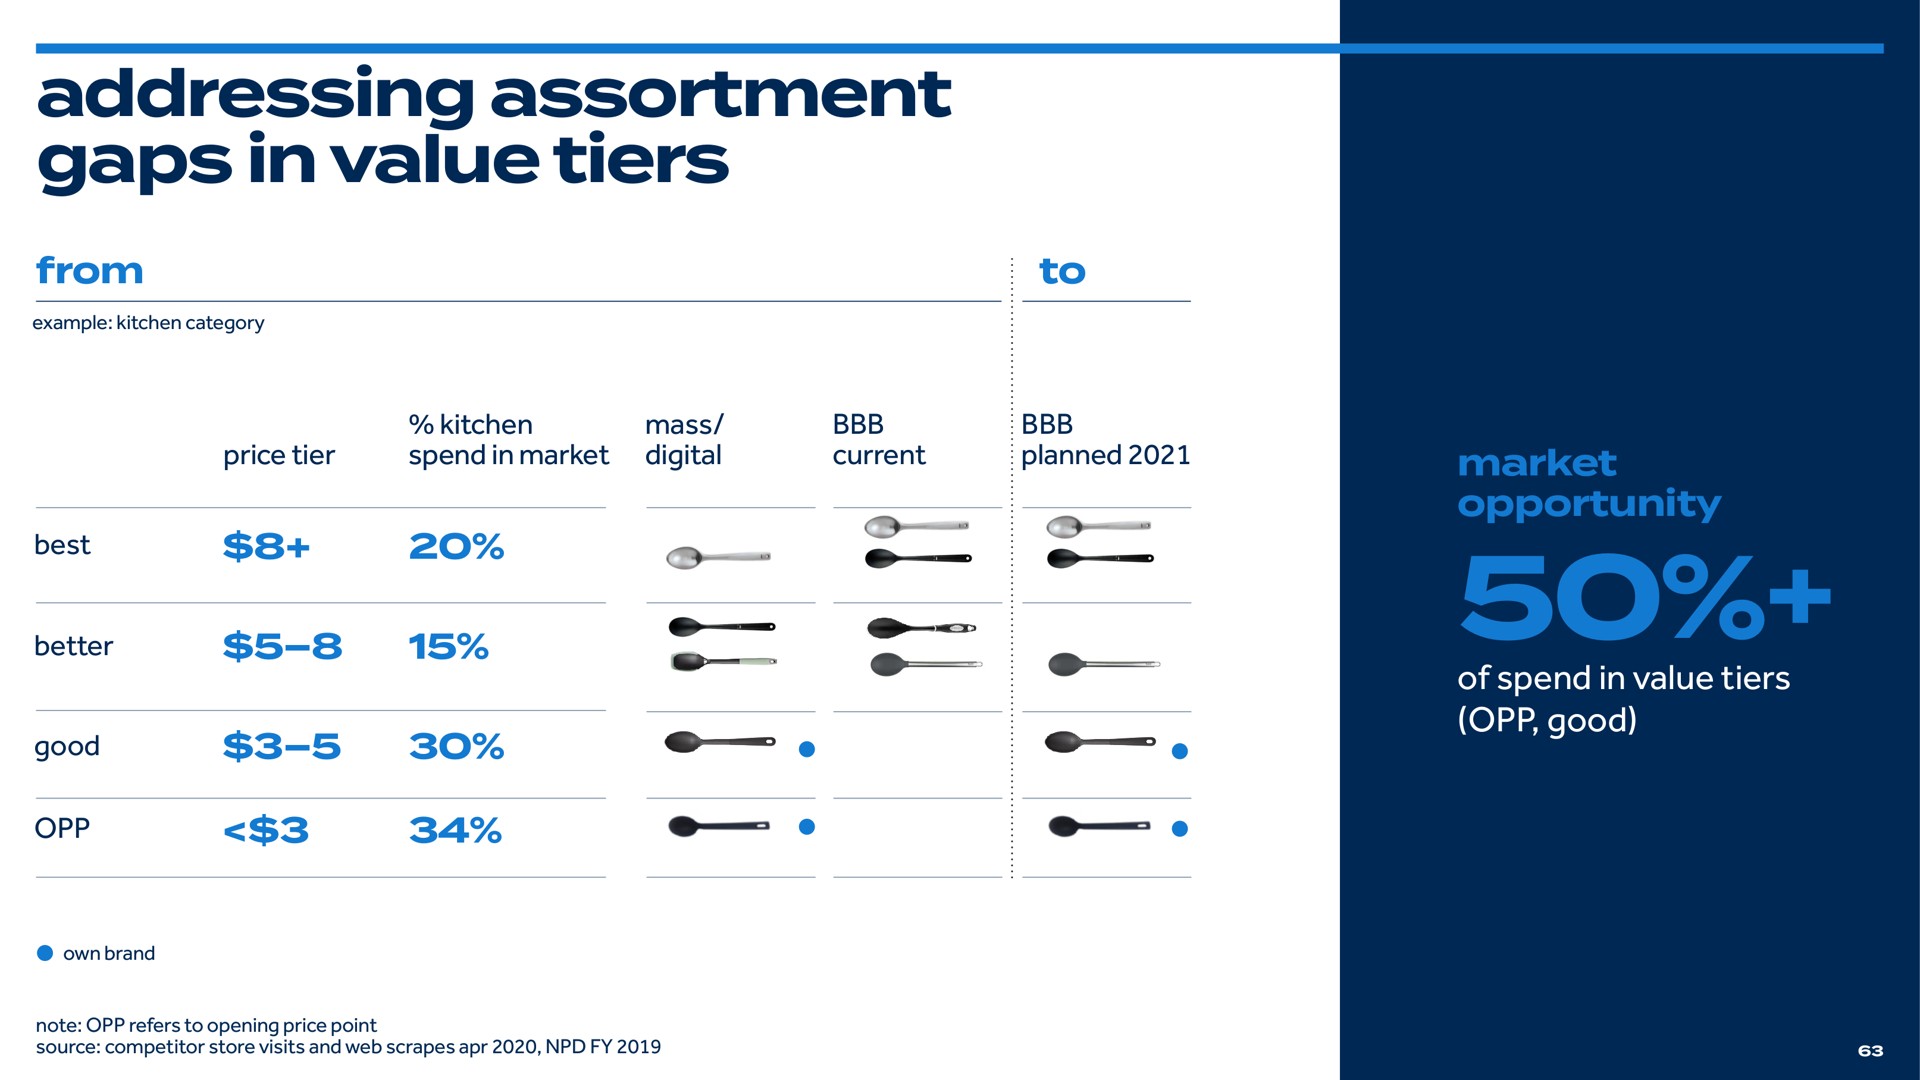 addressing assortment gaps in value tiers | Bed Bath & Beyond